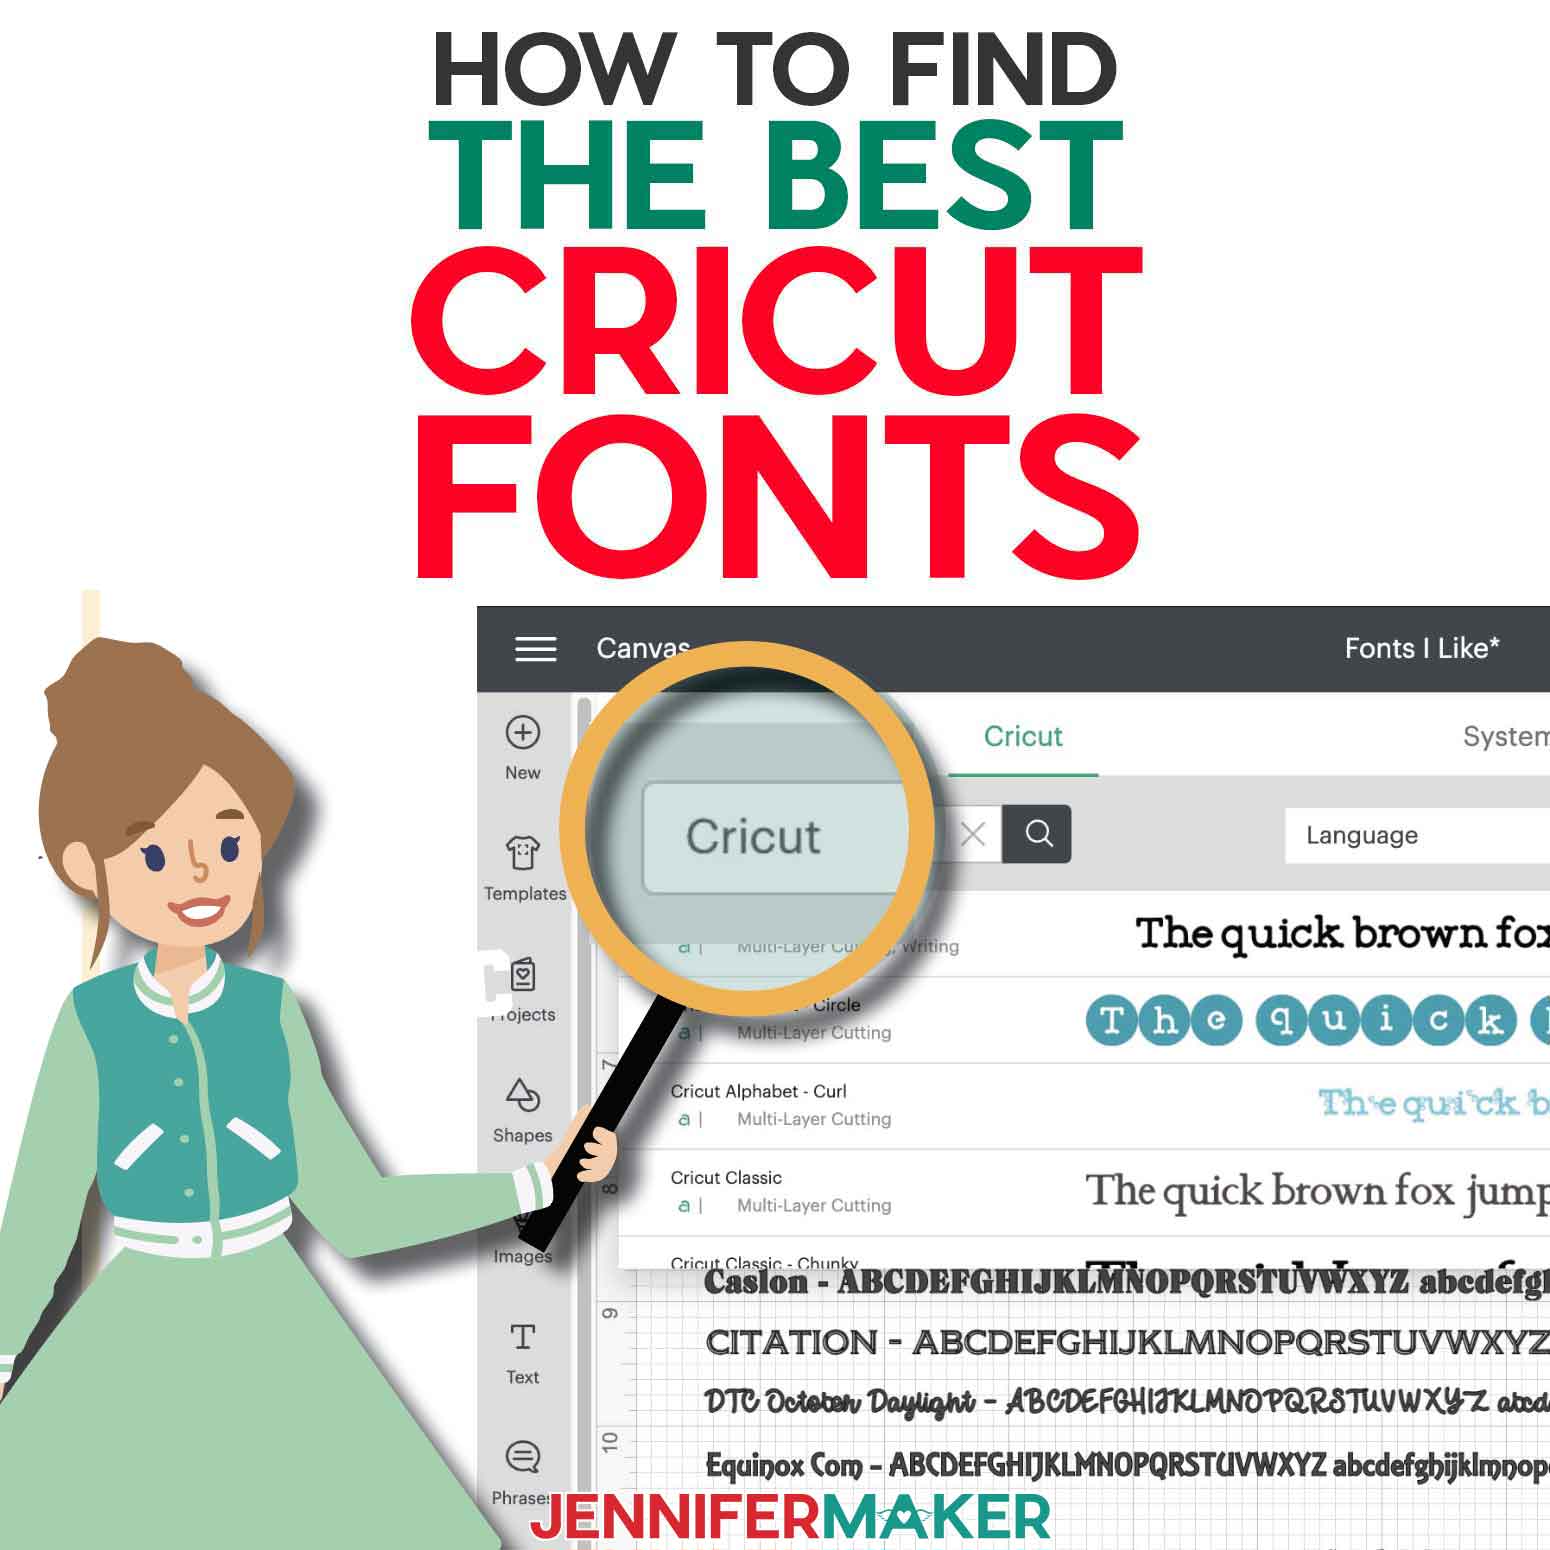 Cricut Fonts List: How to Find the BEST Cricut Fonts in 2023!